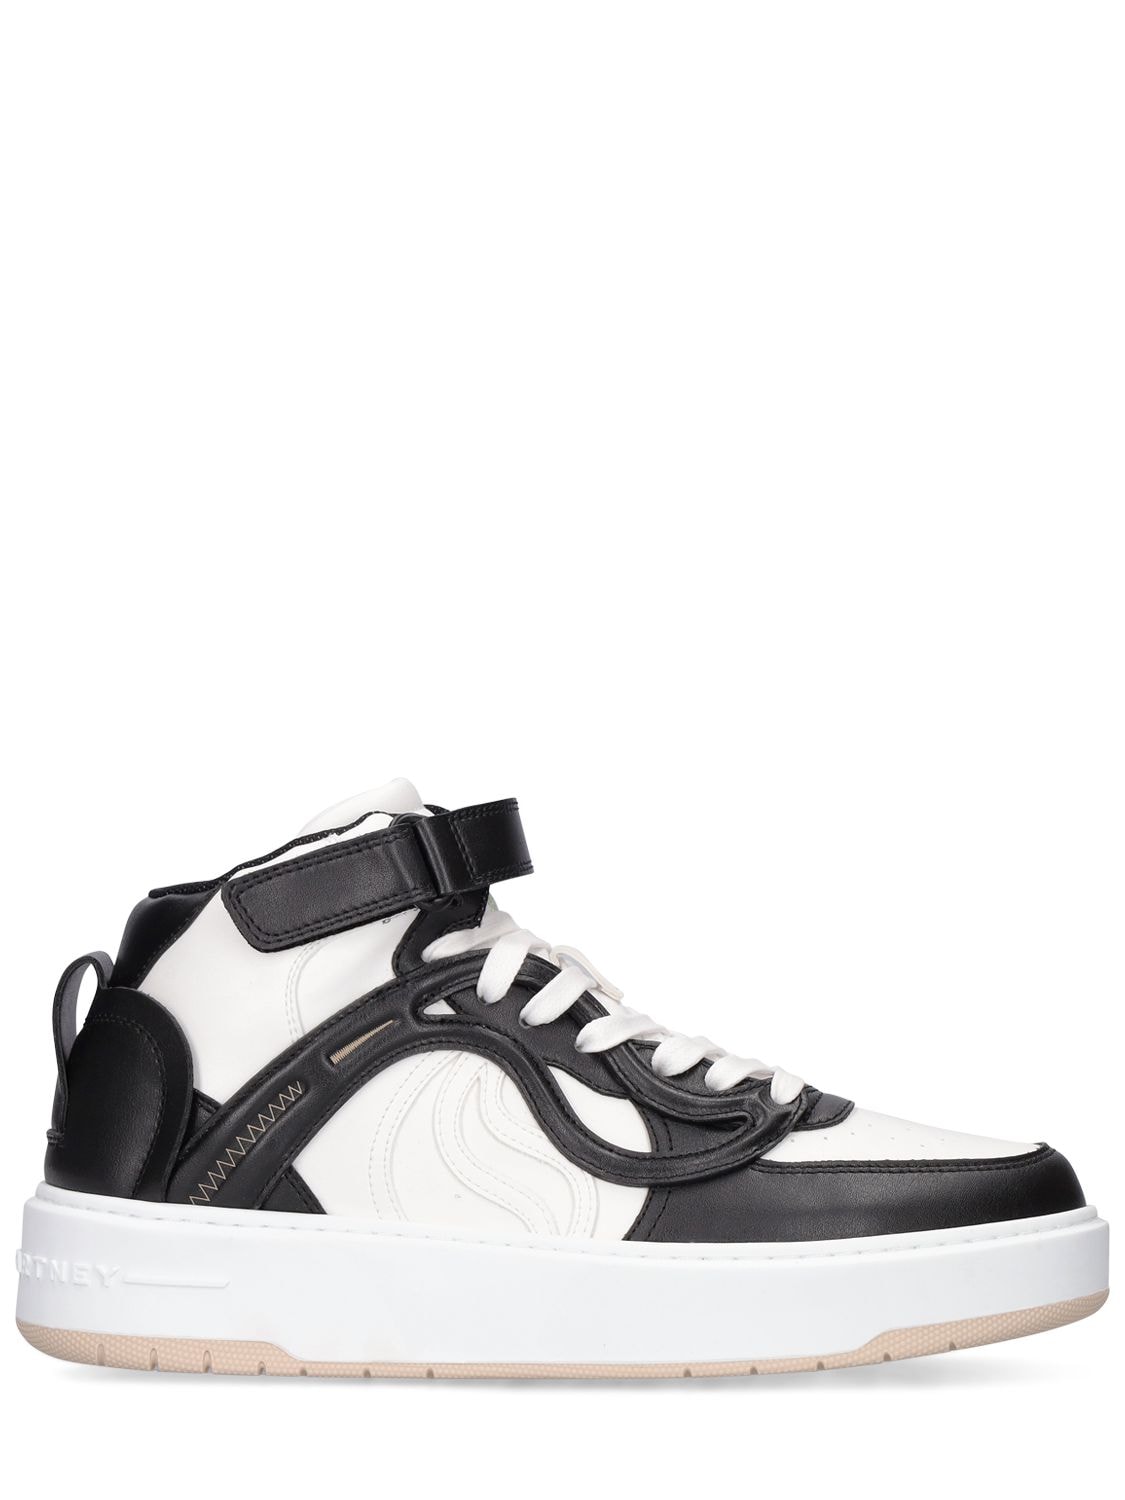 STELLA MCCARTNEY S-WAVE 2 RECYCLED POLYESTER SNEAKERS